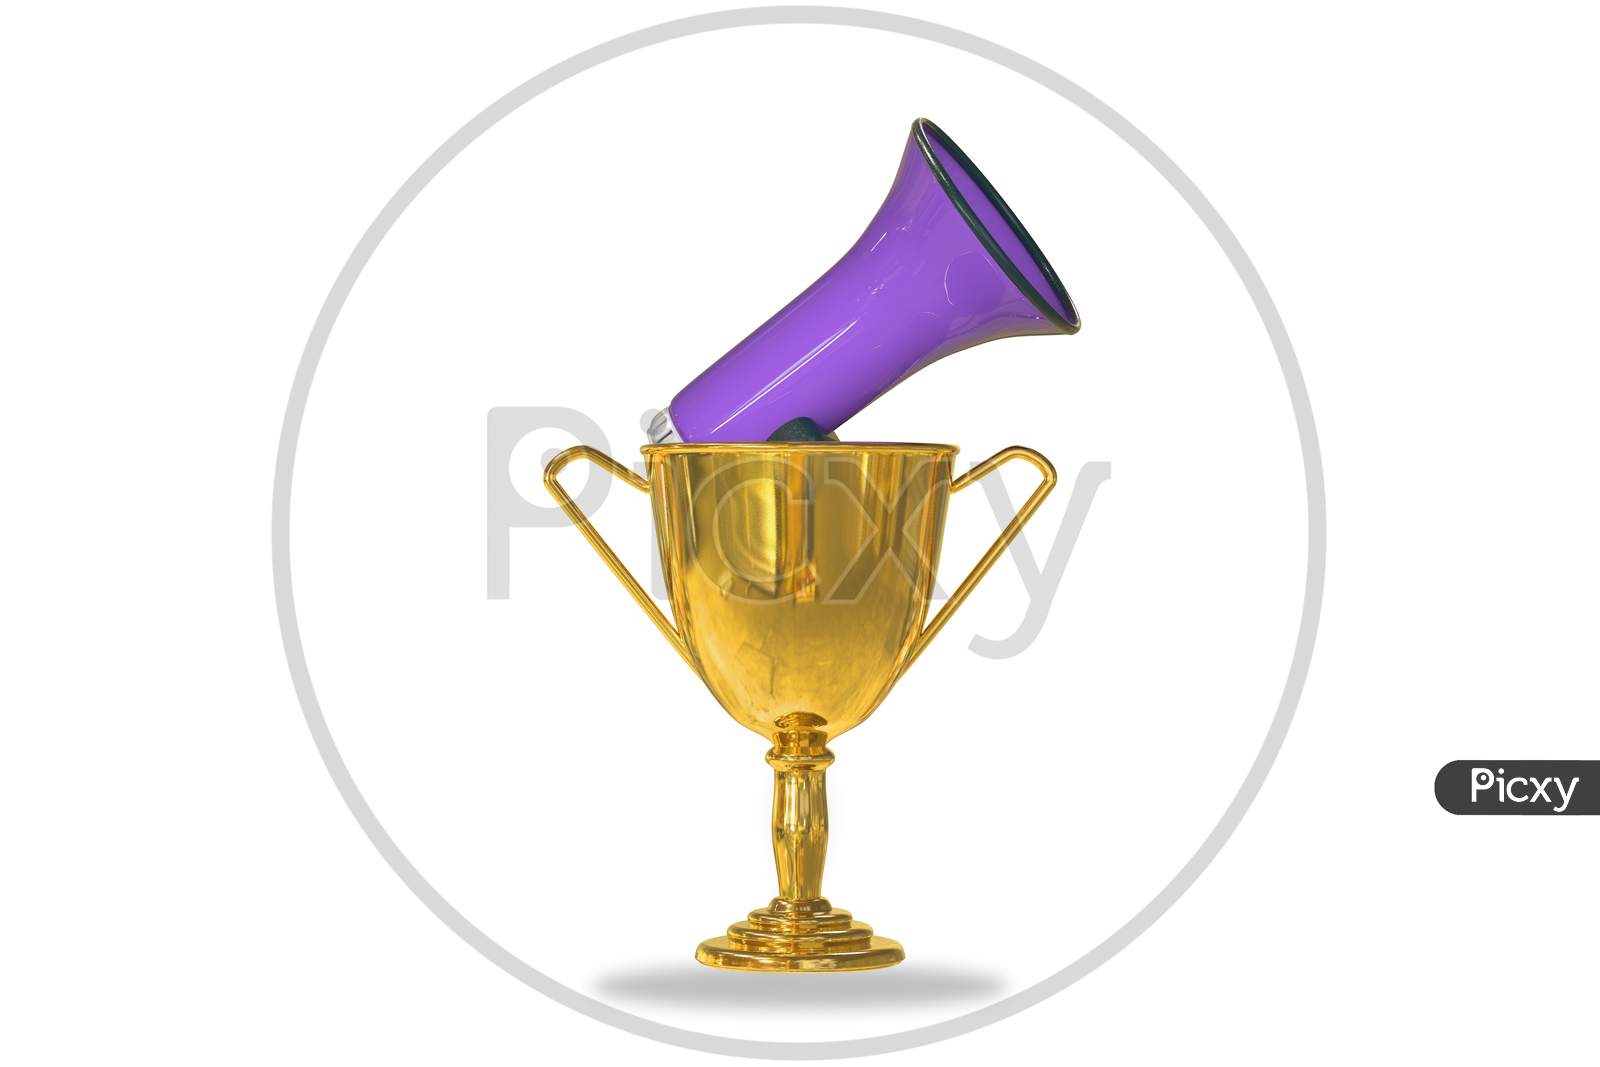 Golden Trophy Cup Isolated On White Background With A Loudspeaker Inside. Promote Your Campaigns Or Refer A Friend Or Promotion Or Participation In Your Campaigns Or Award Ceremony Concept. 3D Render